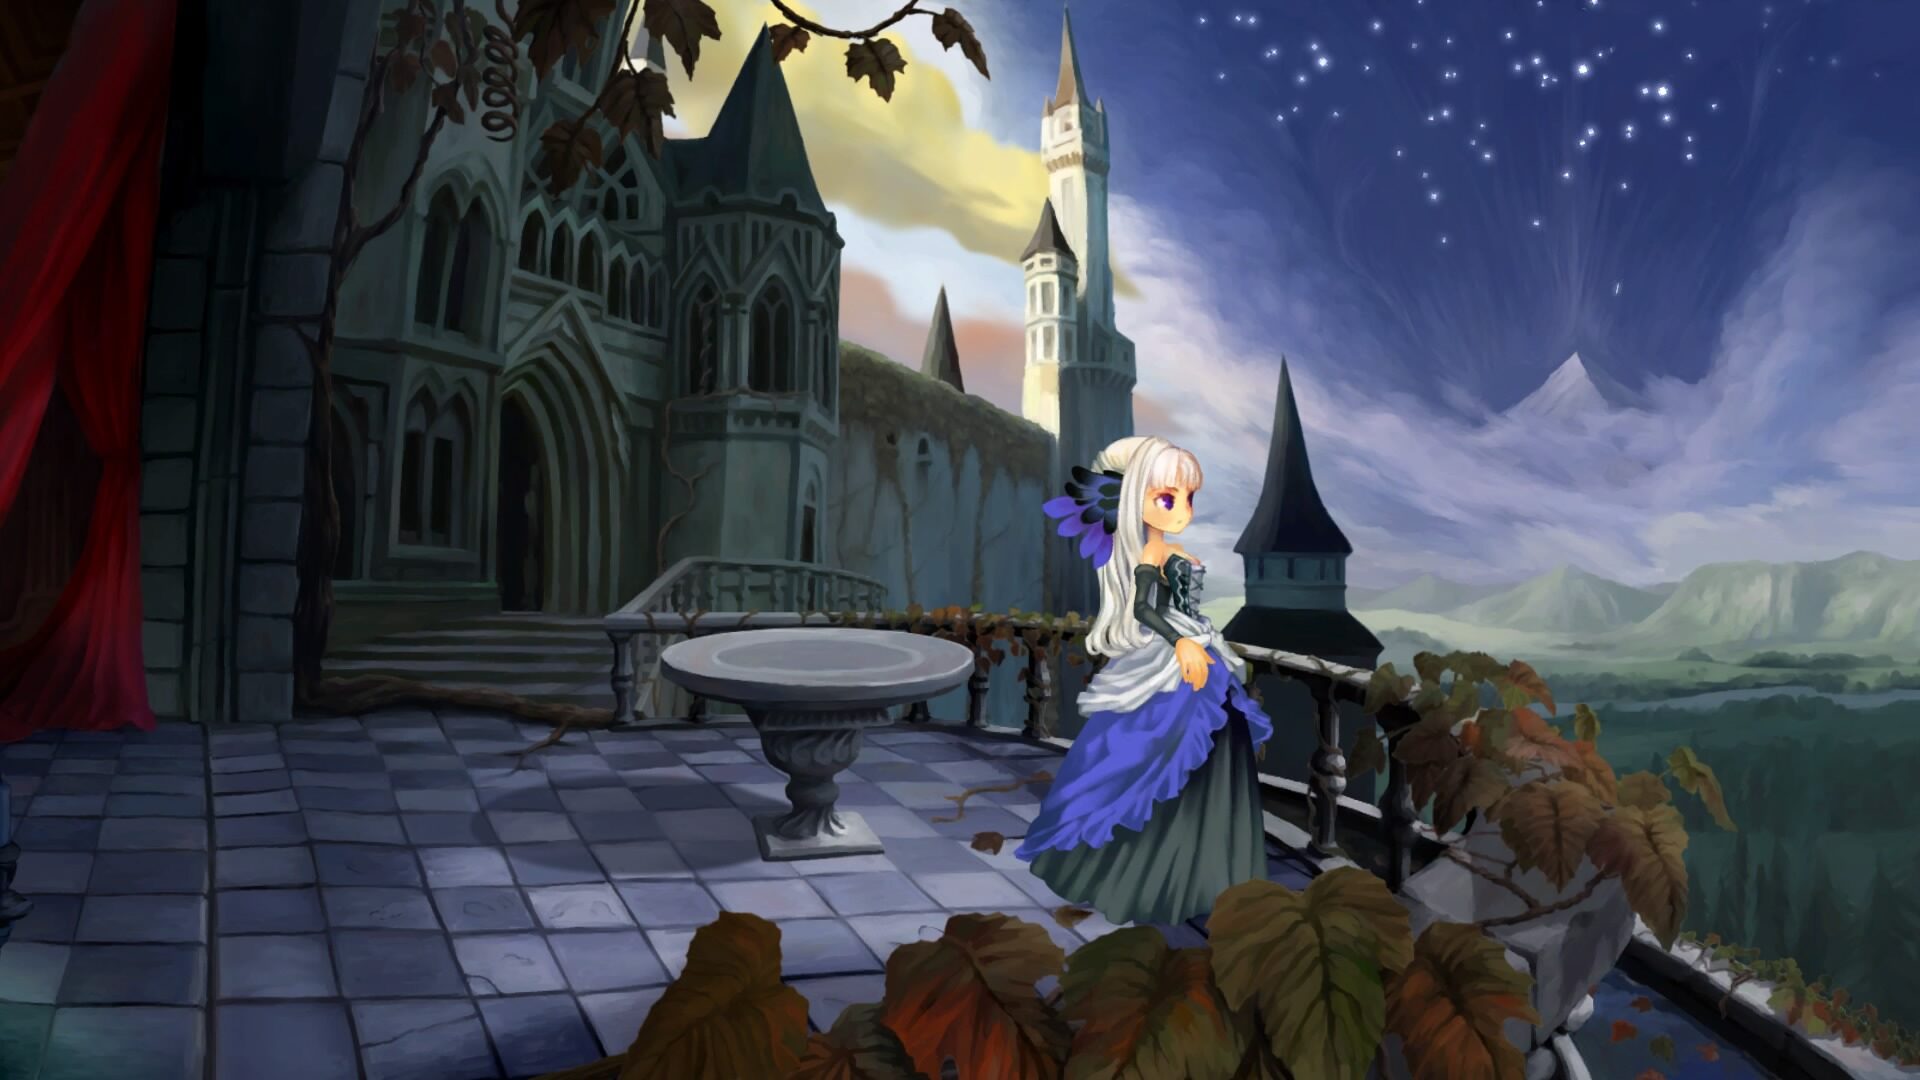 Odin Sphere Leifthrasir Information and Preview